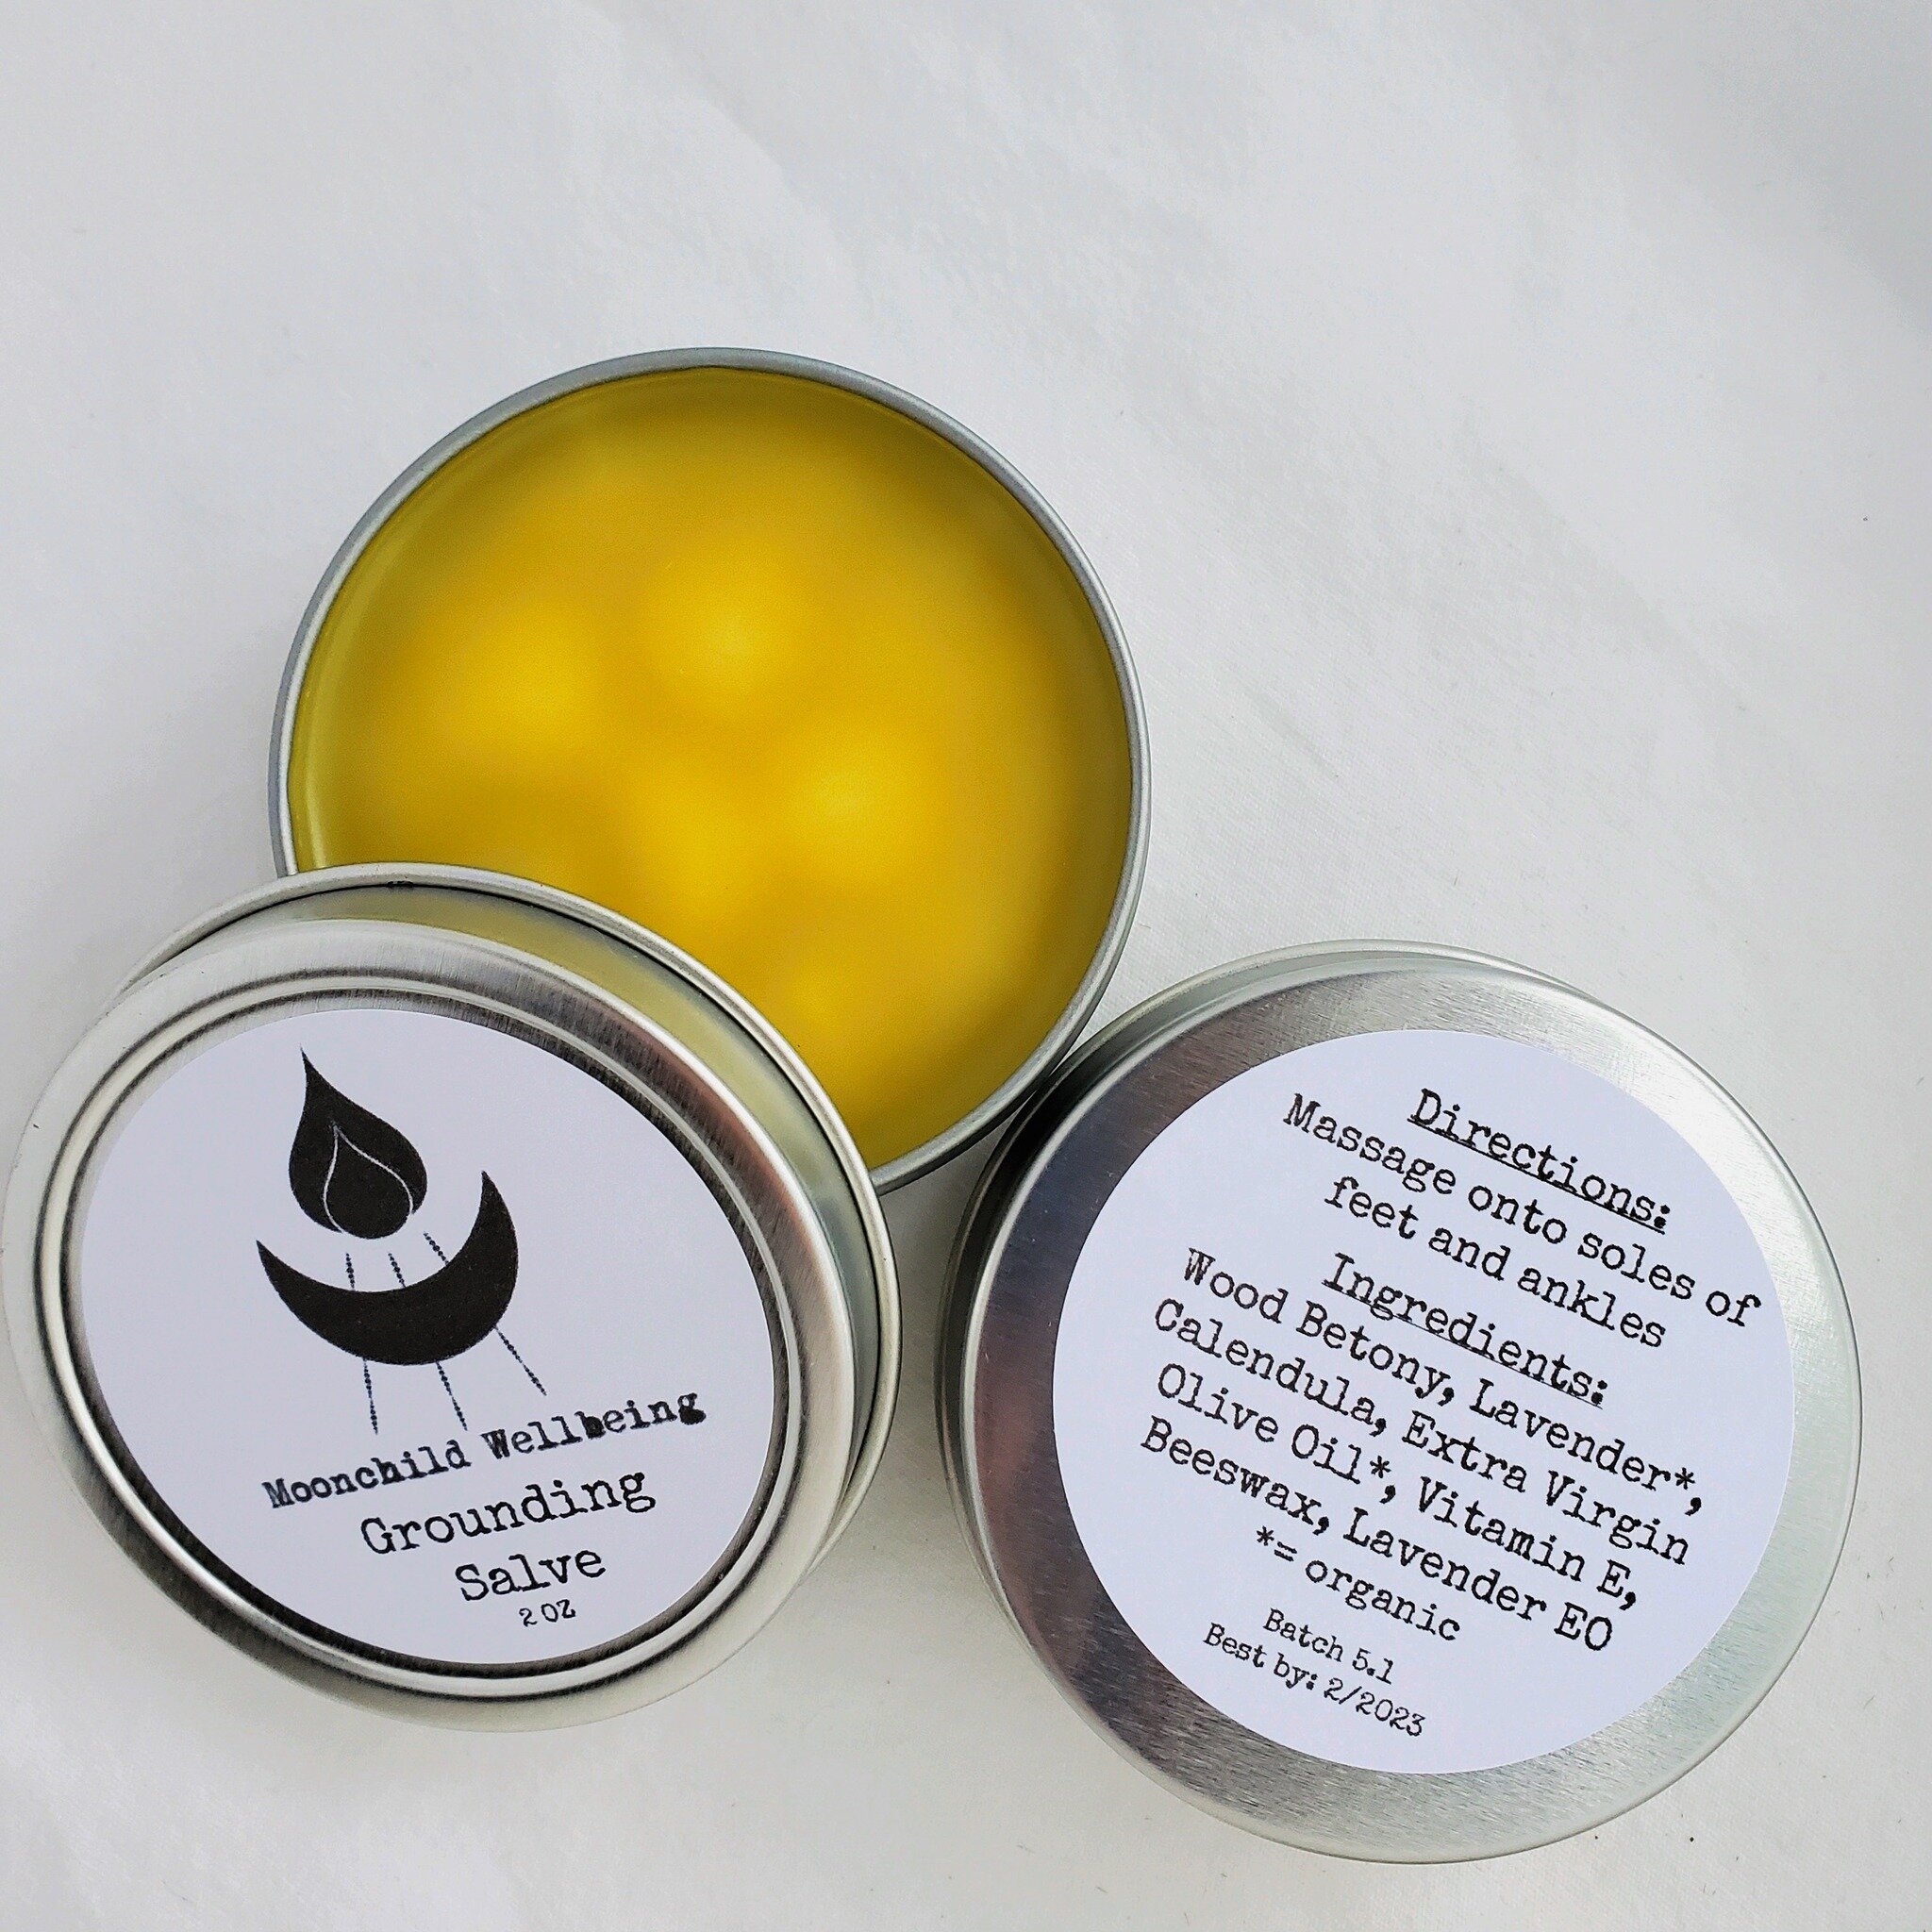 Show some love to your skin! Our selection of topical salves has you covered ✨

Find all our salves in the shop and order today to receive it by Christmas.

✨Grounding Salve relaxes muscles, calms mental and physical tension, and soothes skin. It&rsq